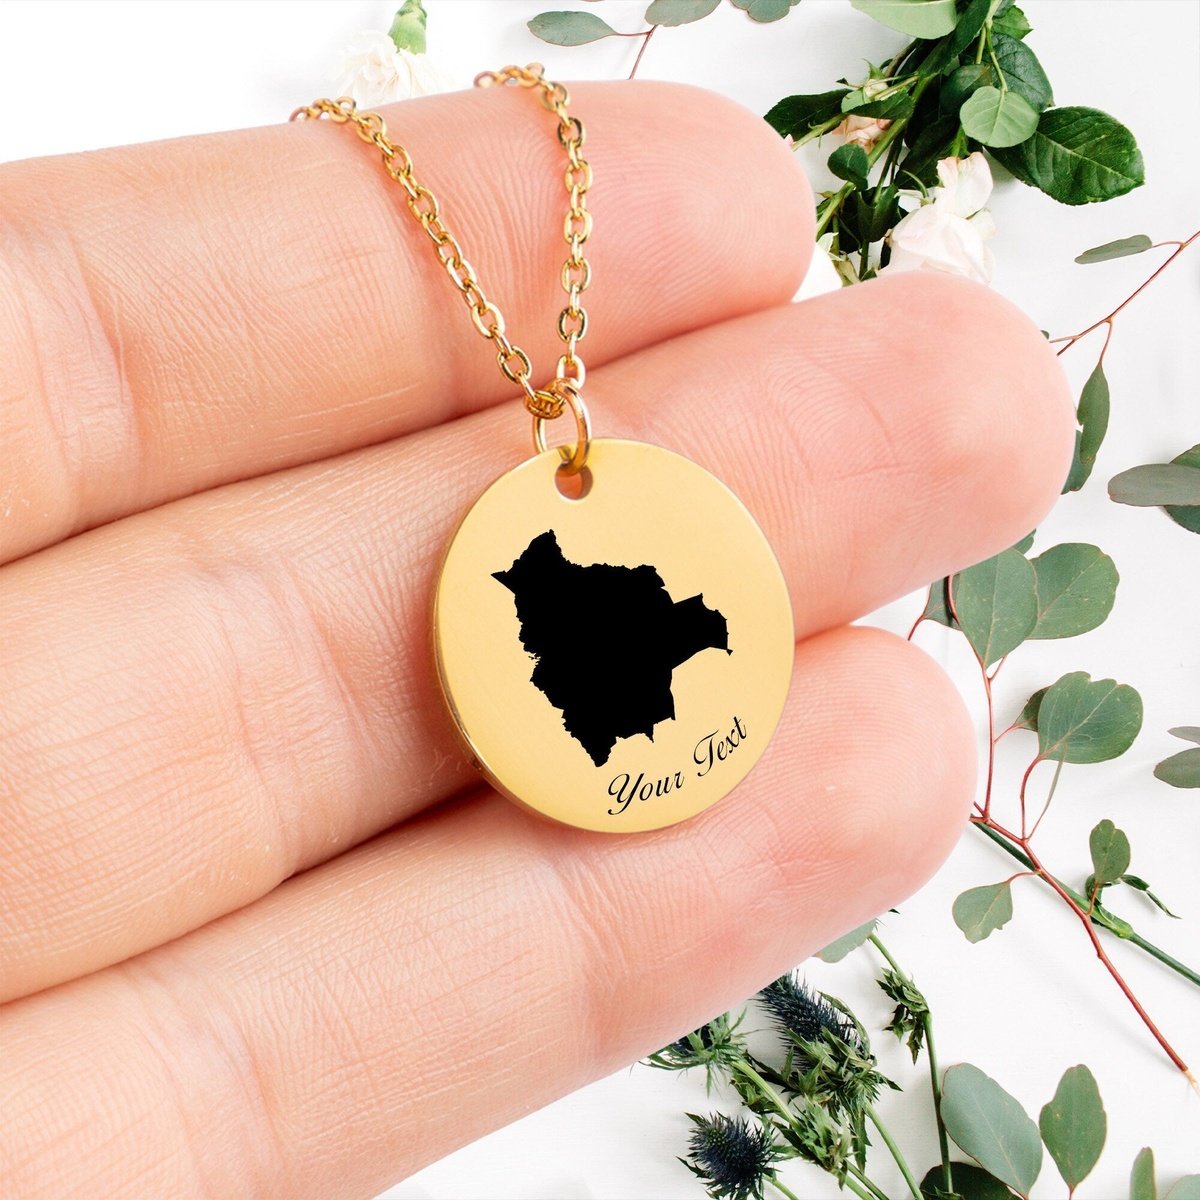 Bolivia Country Map Necklace, Your Name Necklace, Minimalist Necklace, Personalized Gift, Silver Necklace, Gift For Him Her